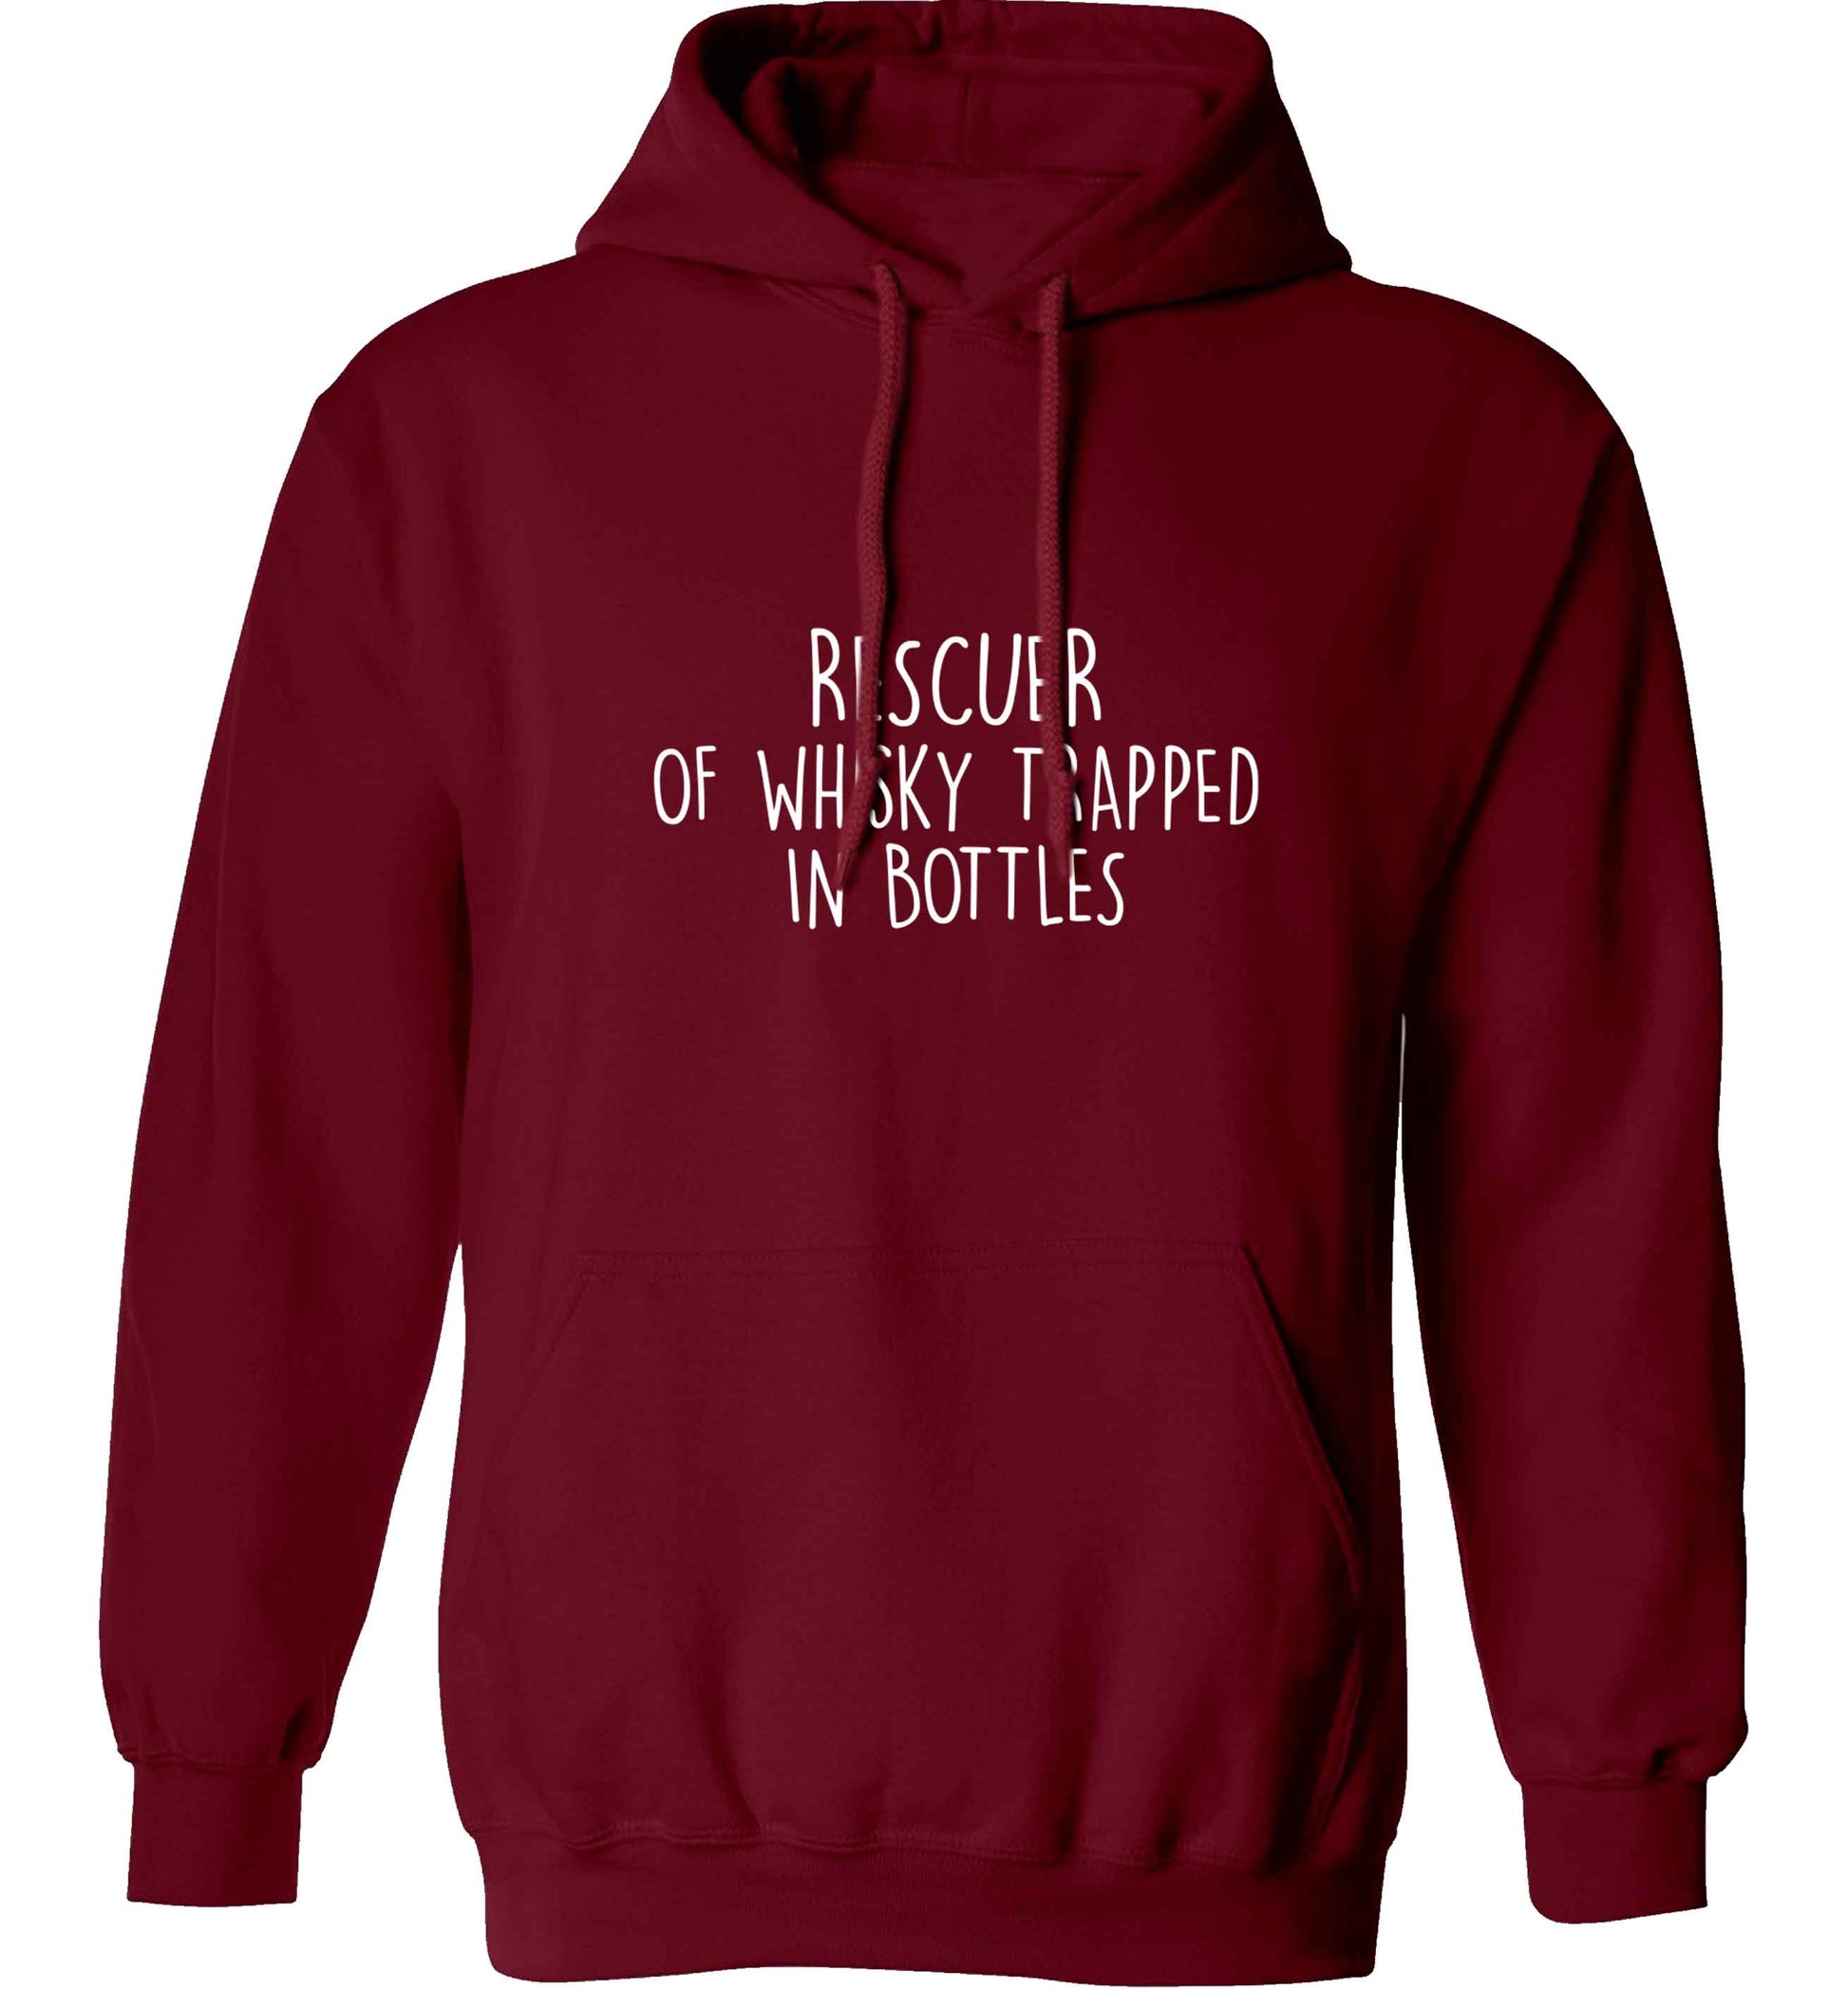 Rescuer of whisky trapped in bottles adults unisex maroon hoodie 2XL